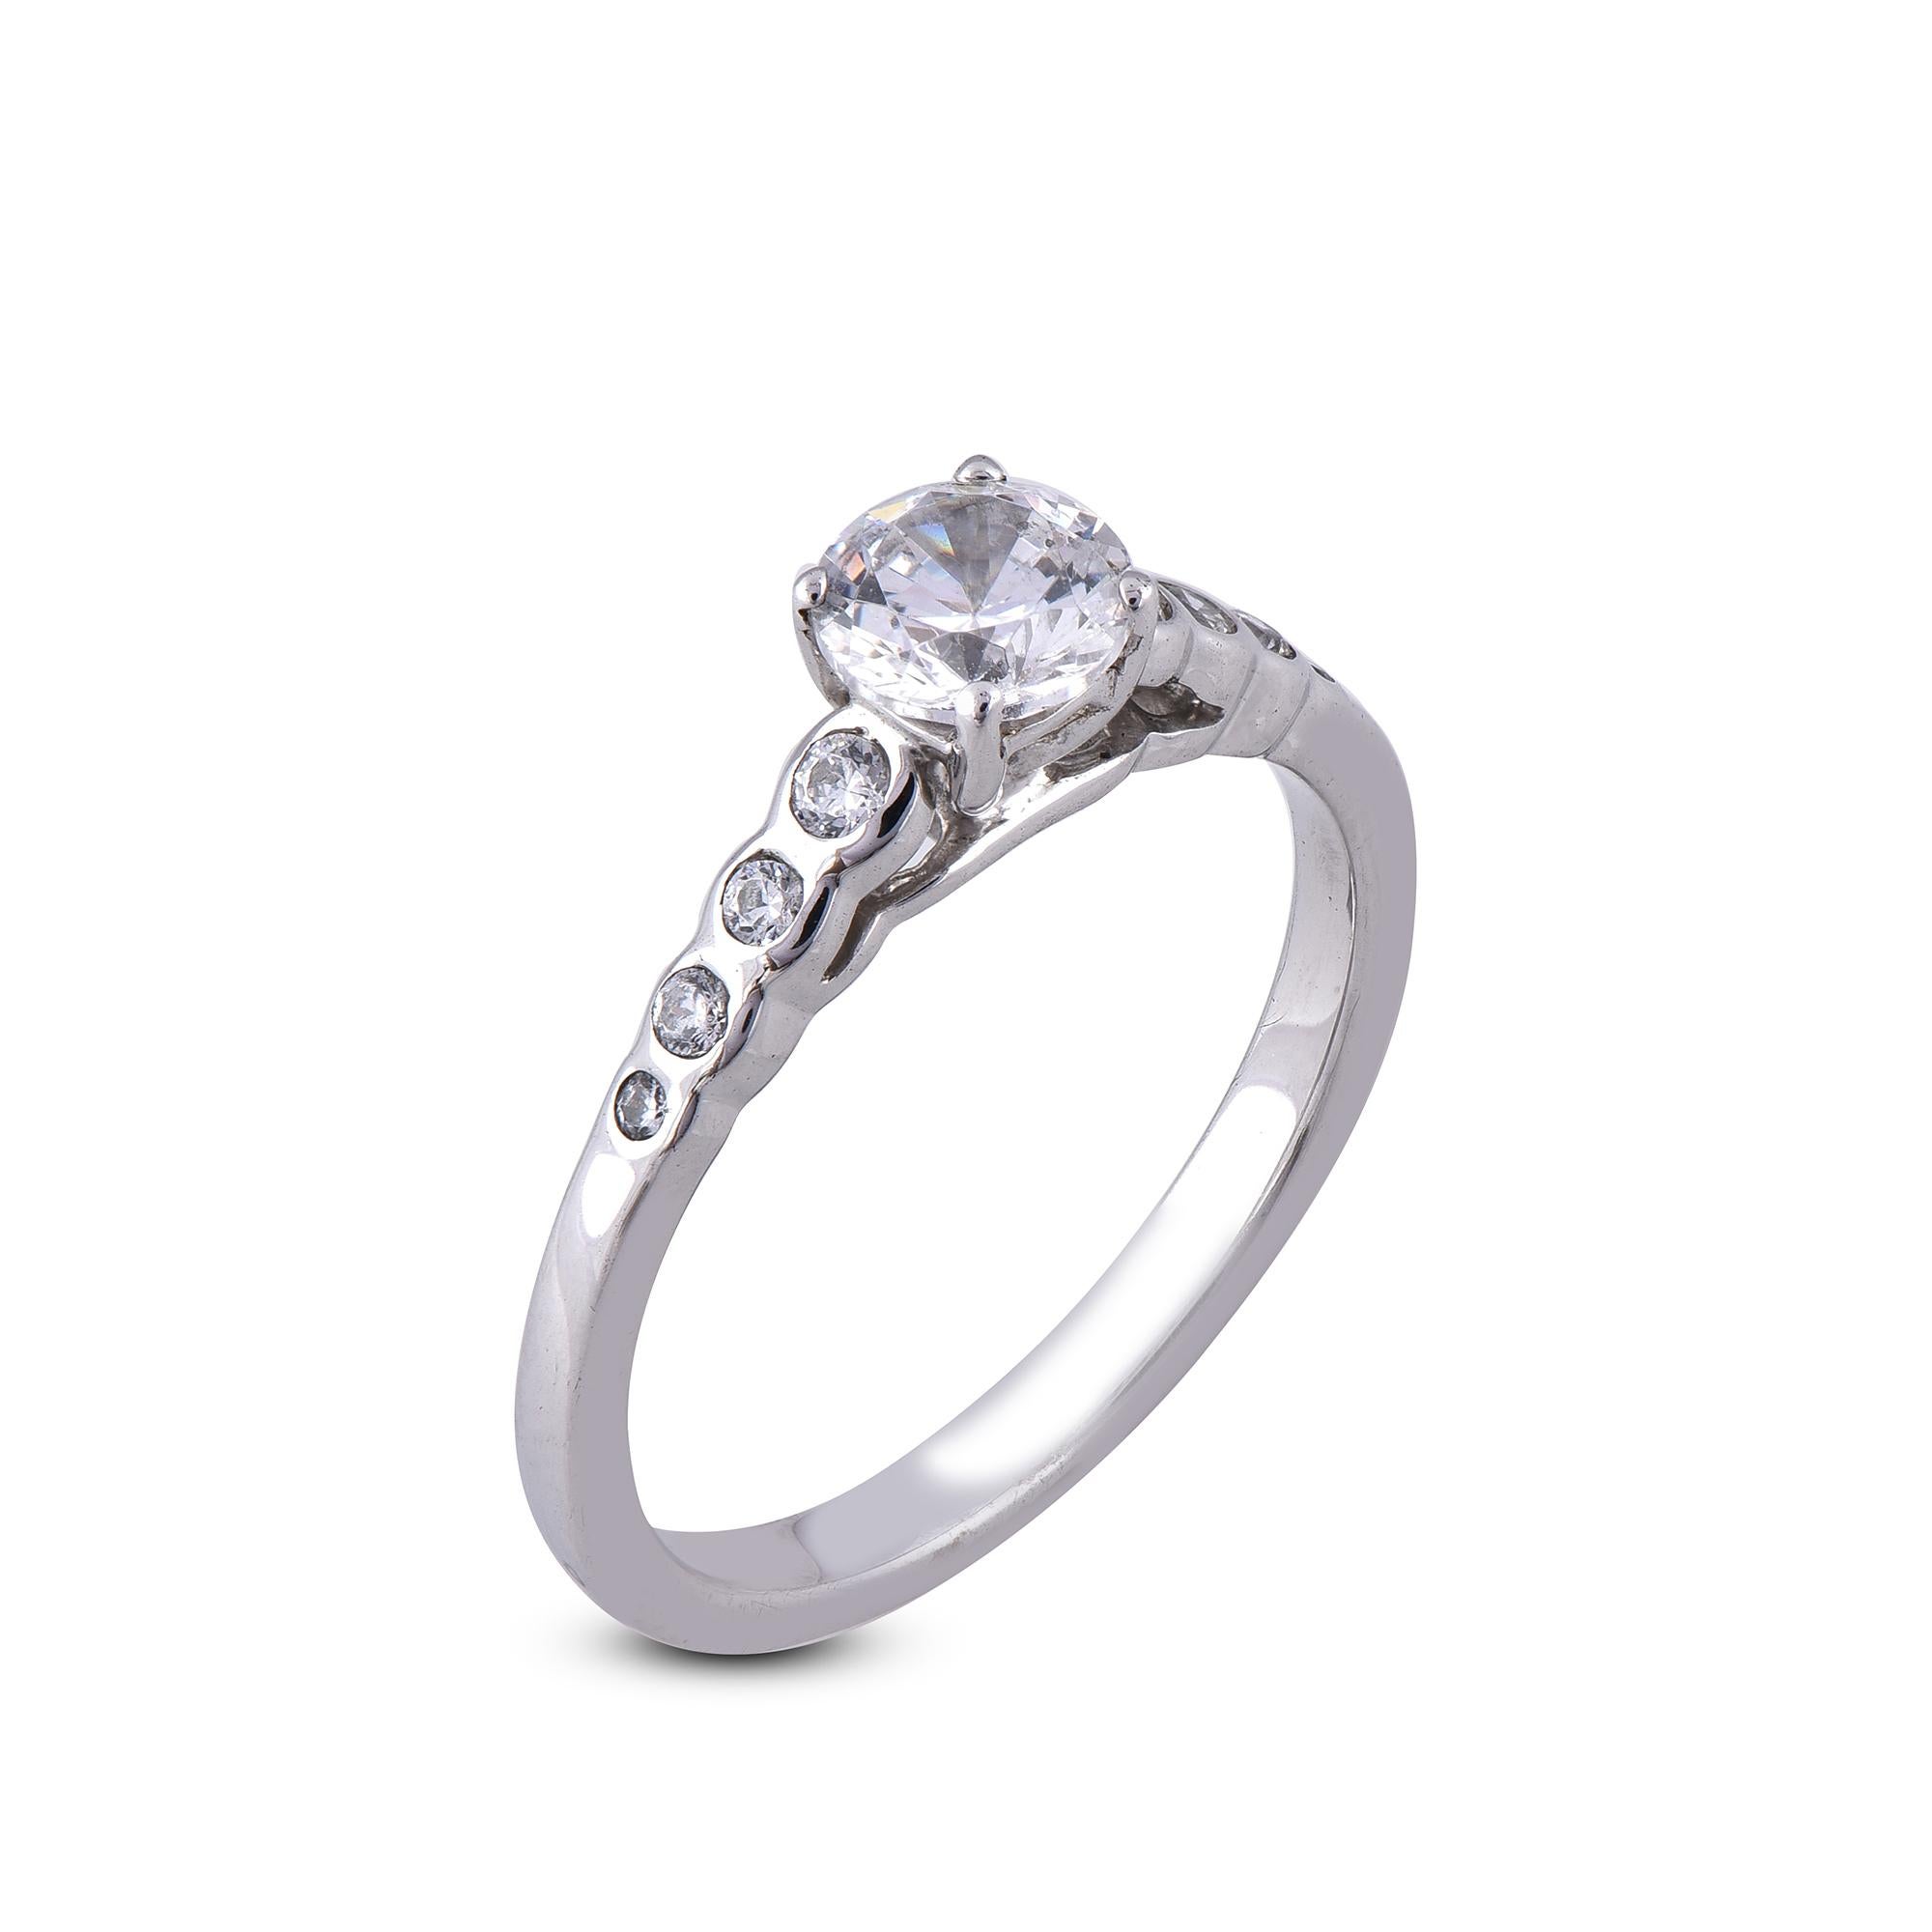 Bring charm to your look with this scalloped engagement ring. This ring is features 0.60 ct centre stone and 0.15 ct shoulder diamonds and its crafted in 18 karat gold in your choice of white, rose, or yellow, and features 9 round diamond set in